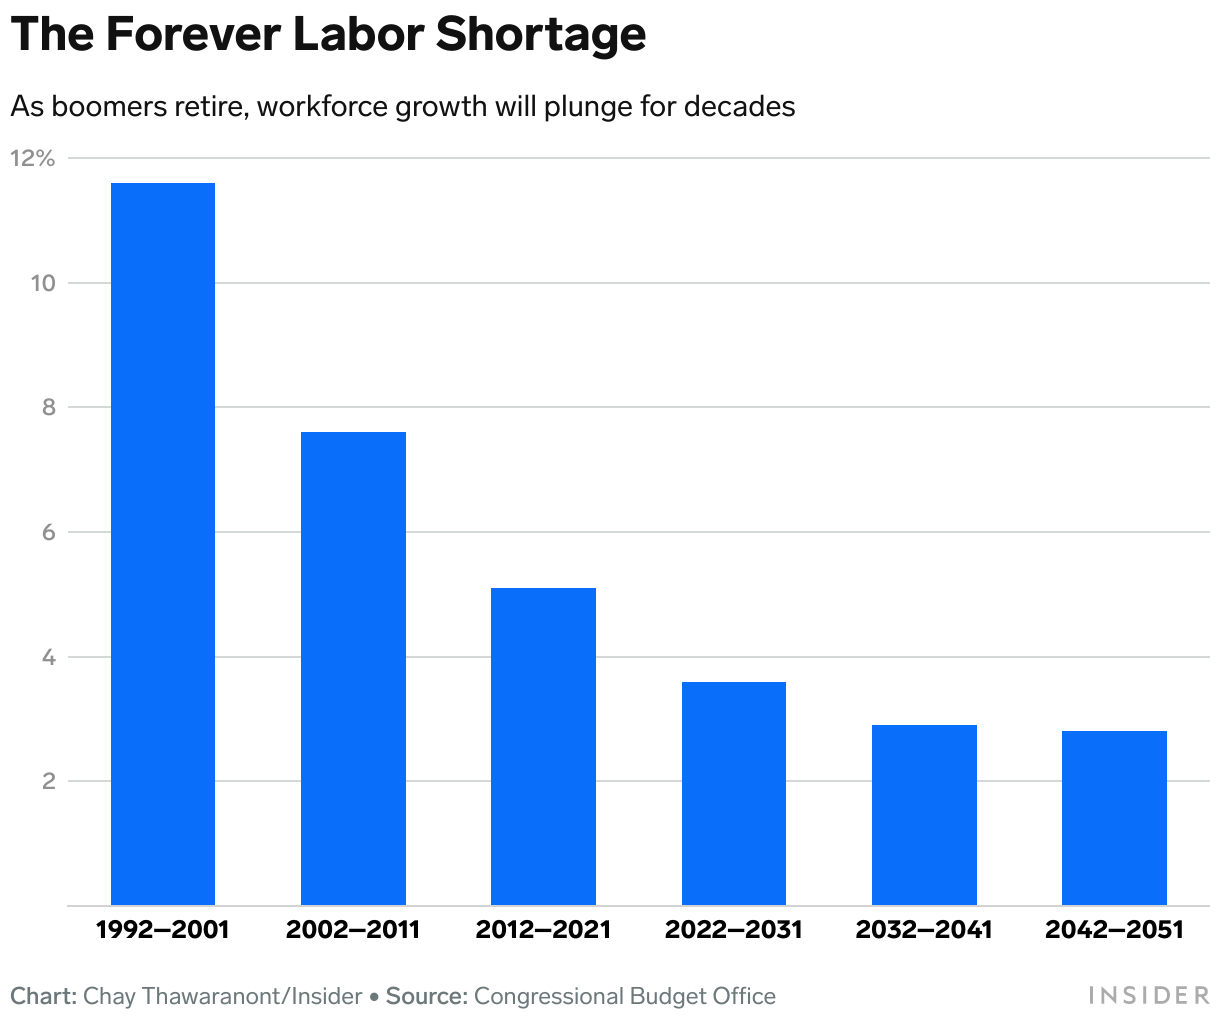 A column bar chart showing a slow growth of the US labor workforce every 10 years from 1992 to 2051. 